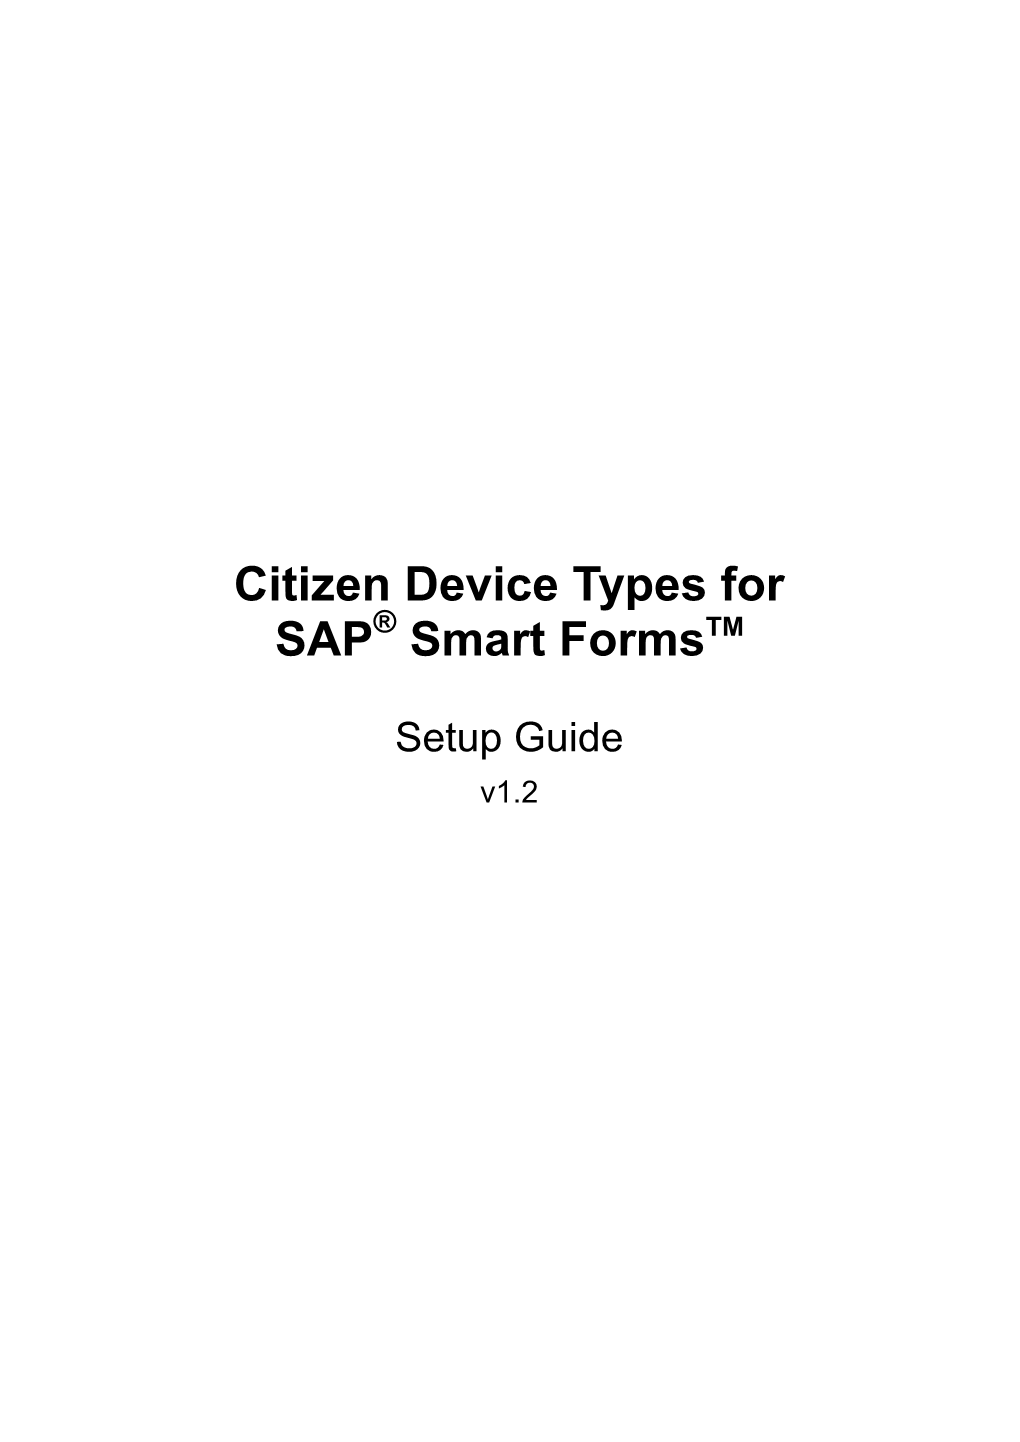 Citizen Device Types for SAP® Smart Formstm